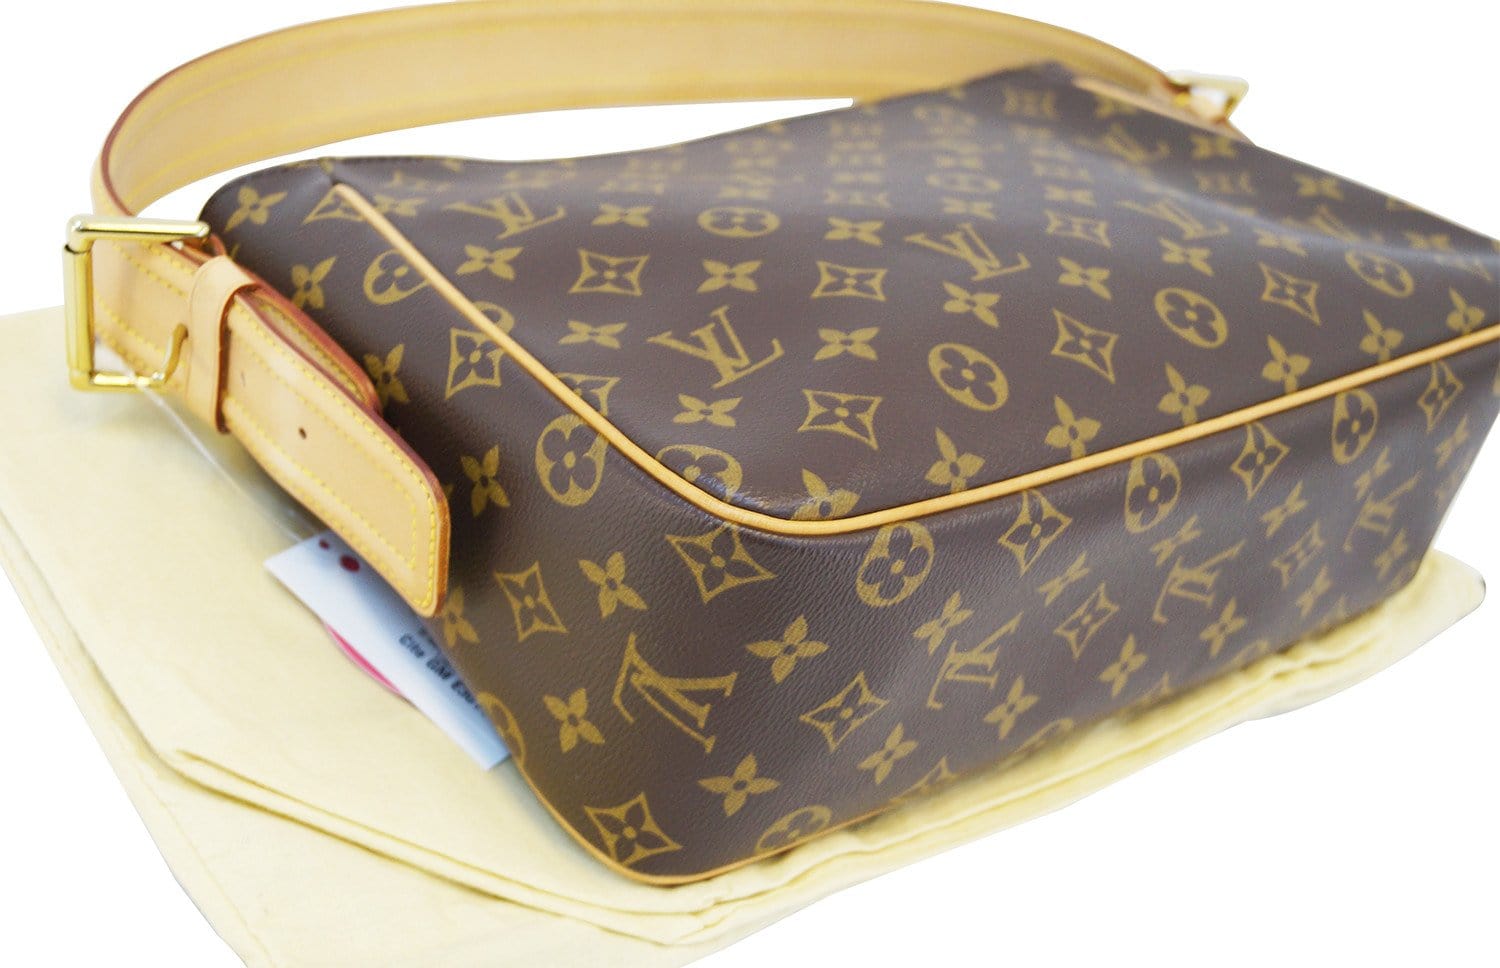 Leather bag Louis Vuitton Navy in Leather - 30470078